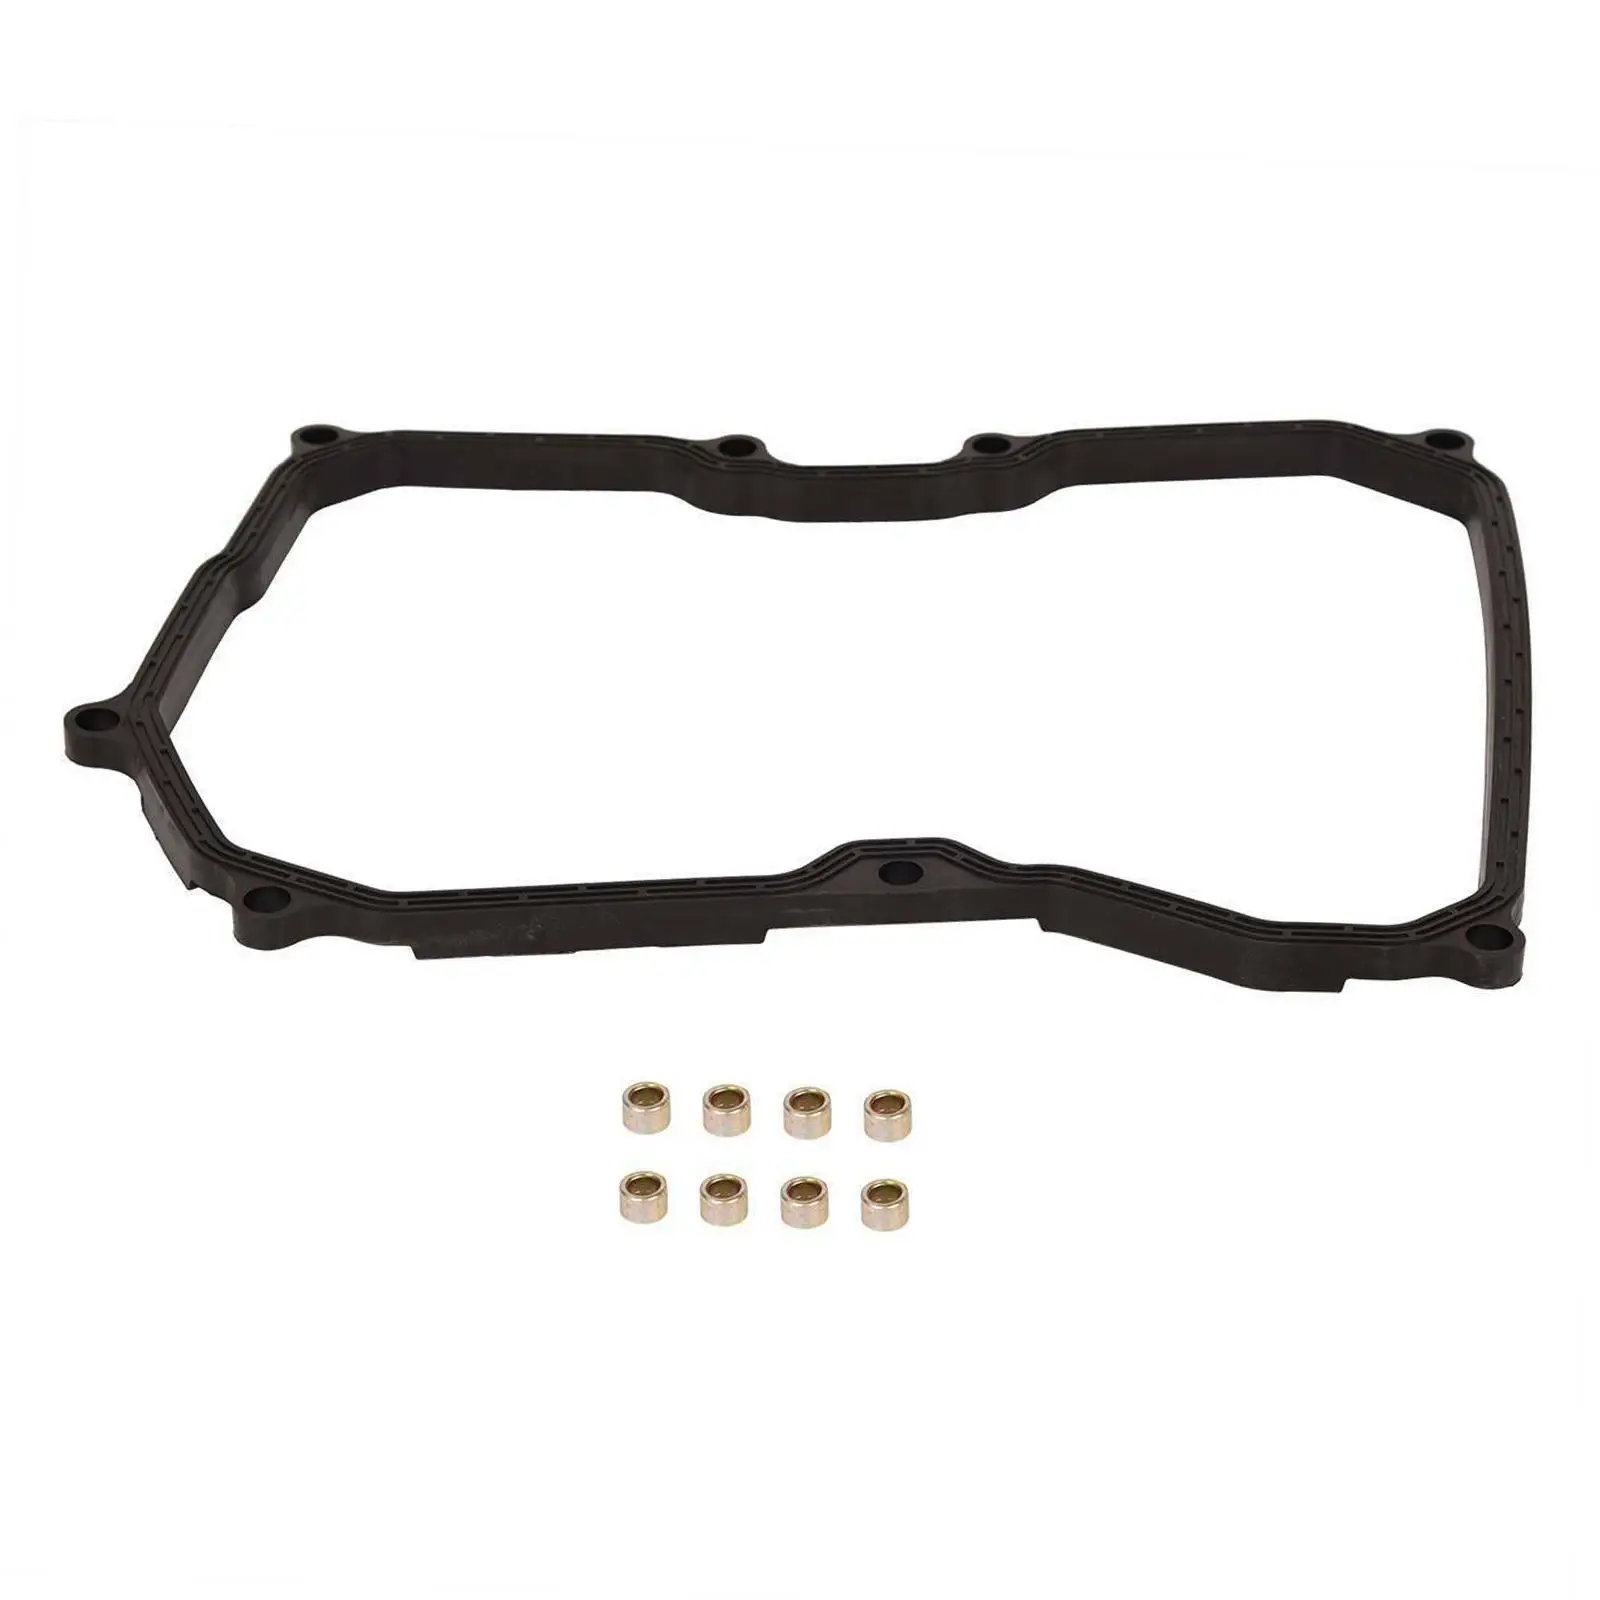 Transmission Oil Pan Gasket Fits for Mini 2007+ Replacement Easy to Install